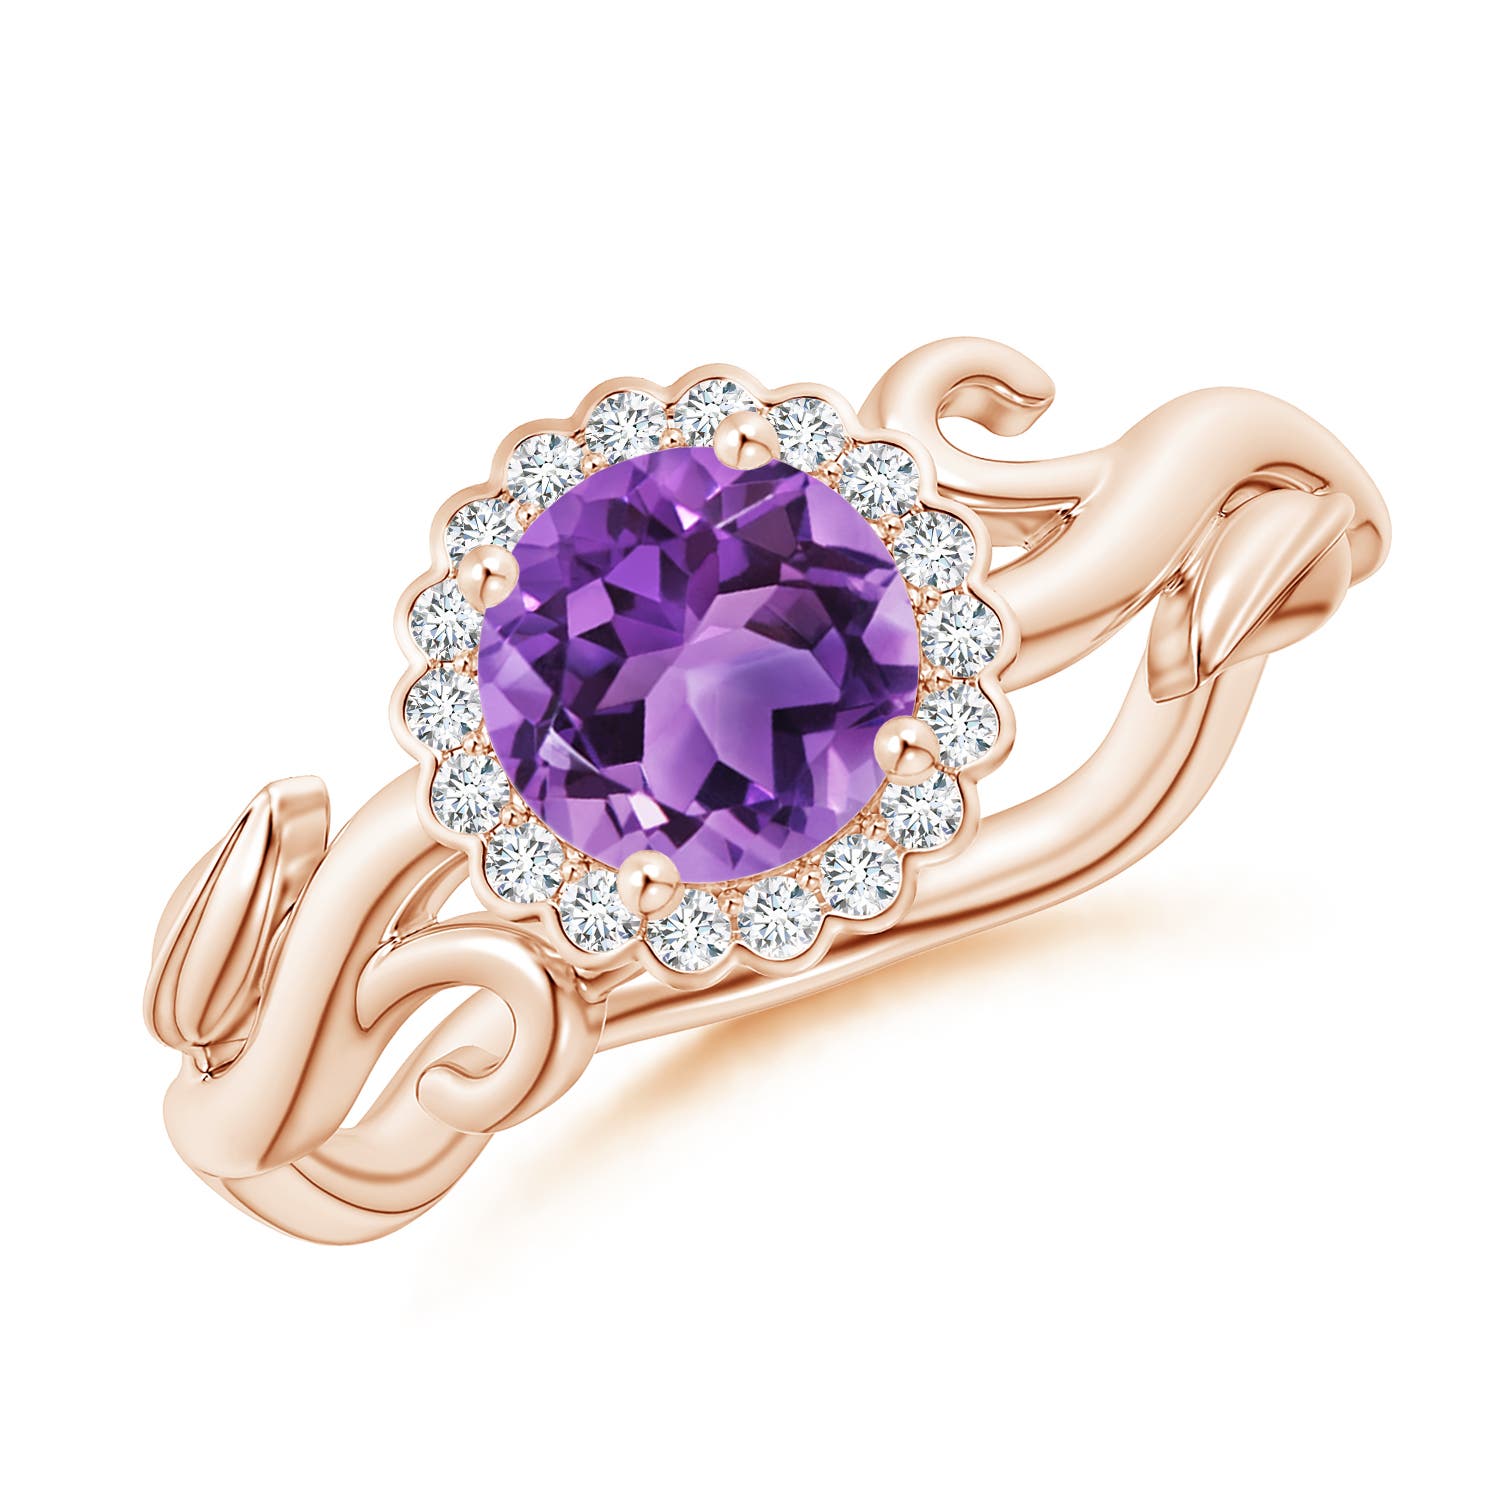 AA - Amethyst / 0.91 CT / 14 KT Rose Gold